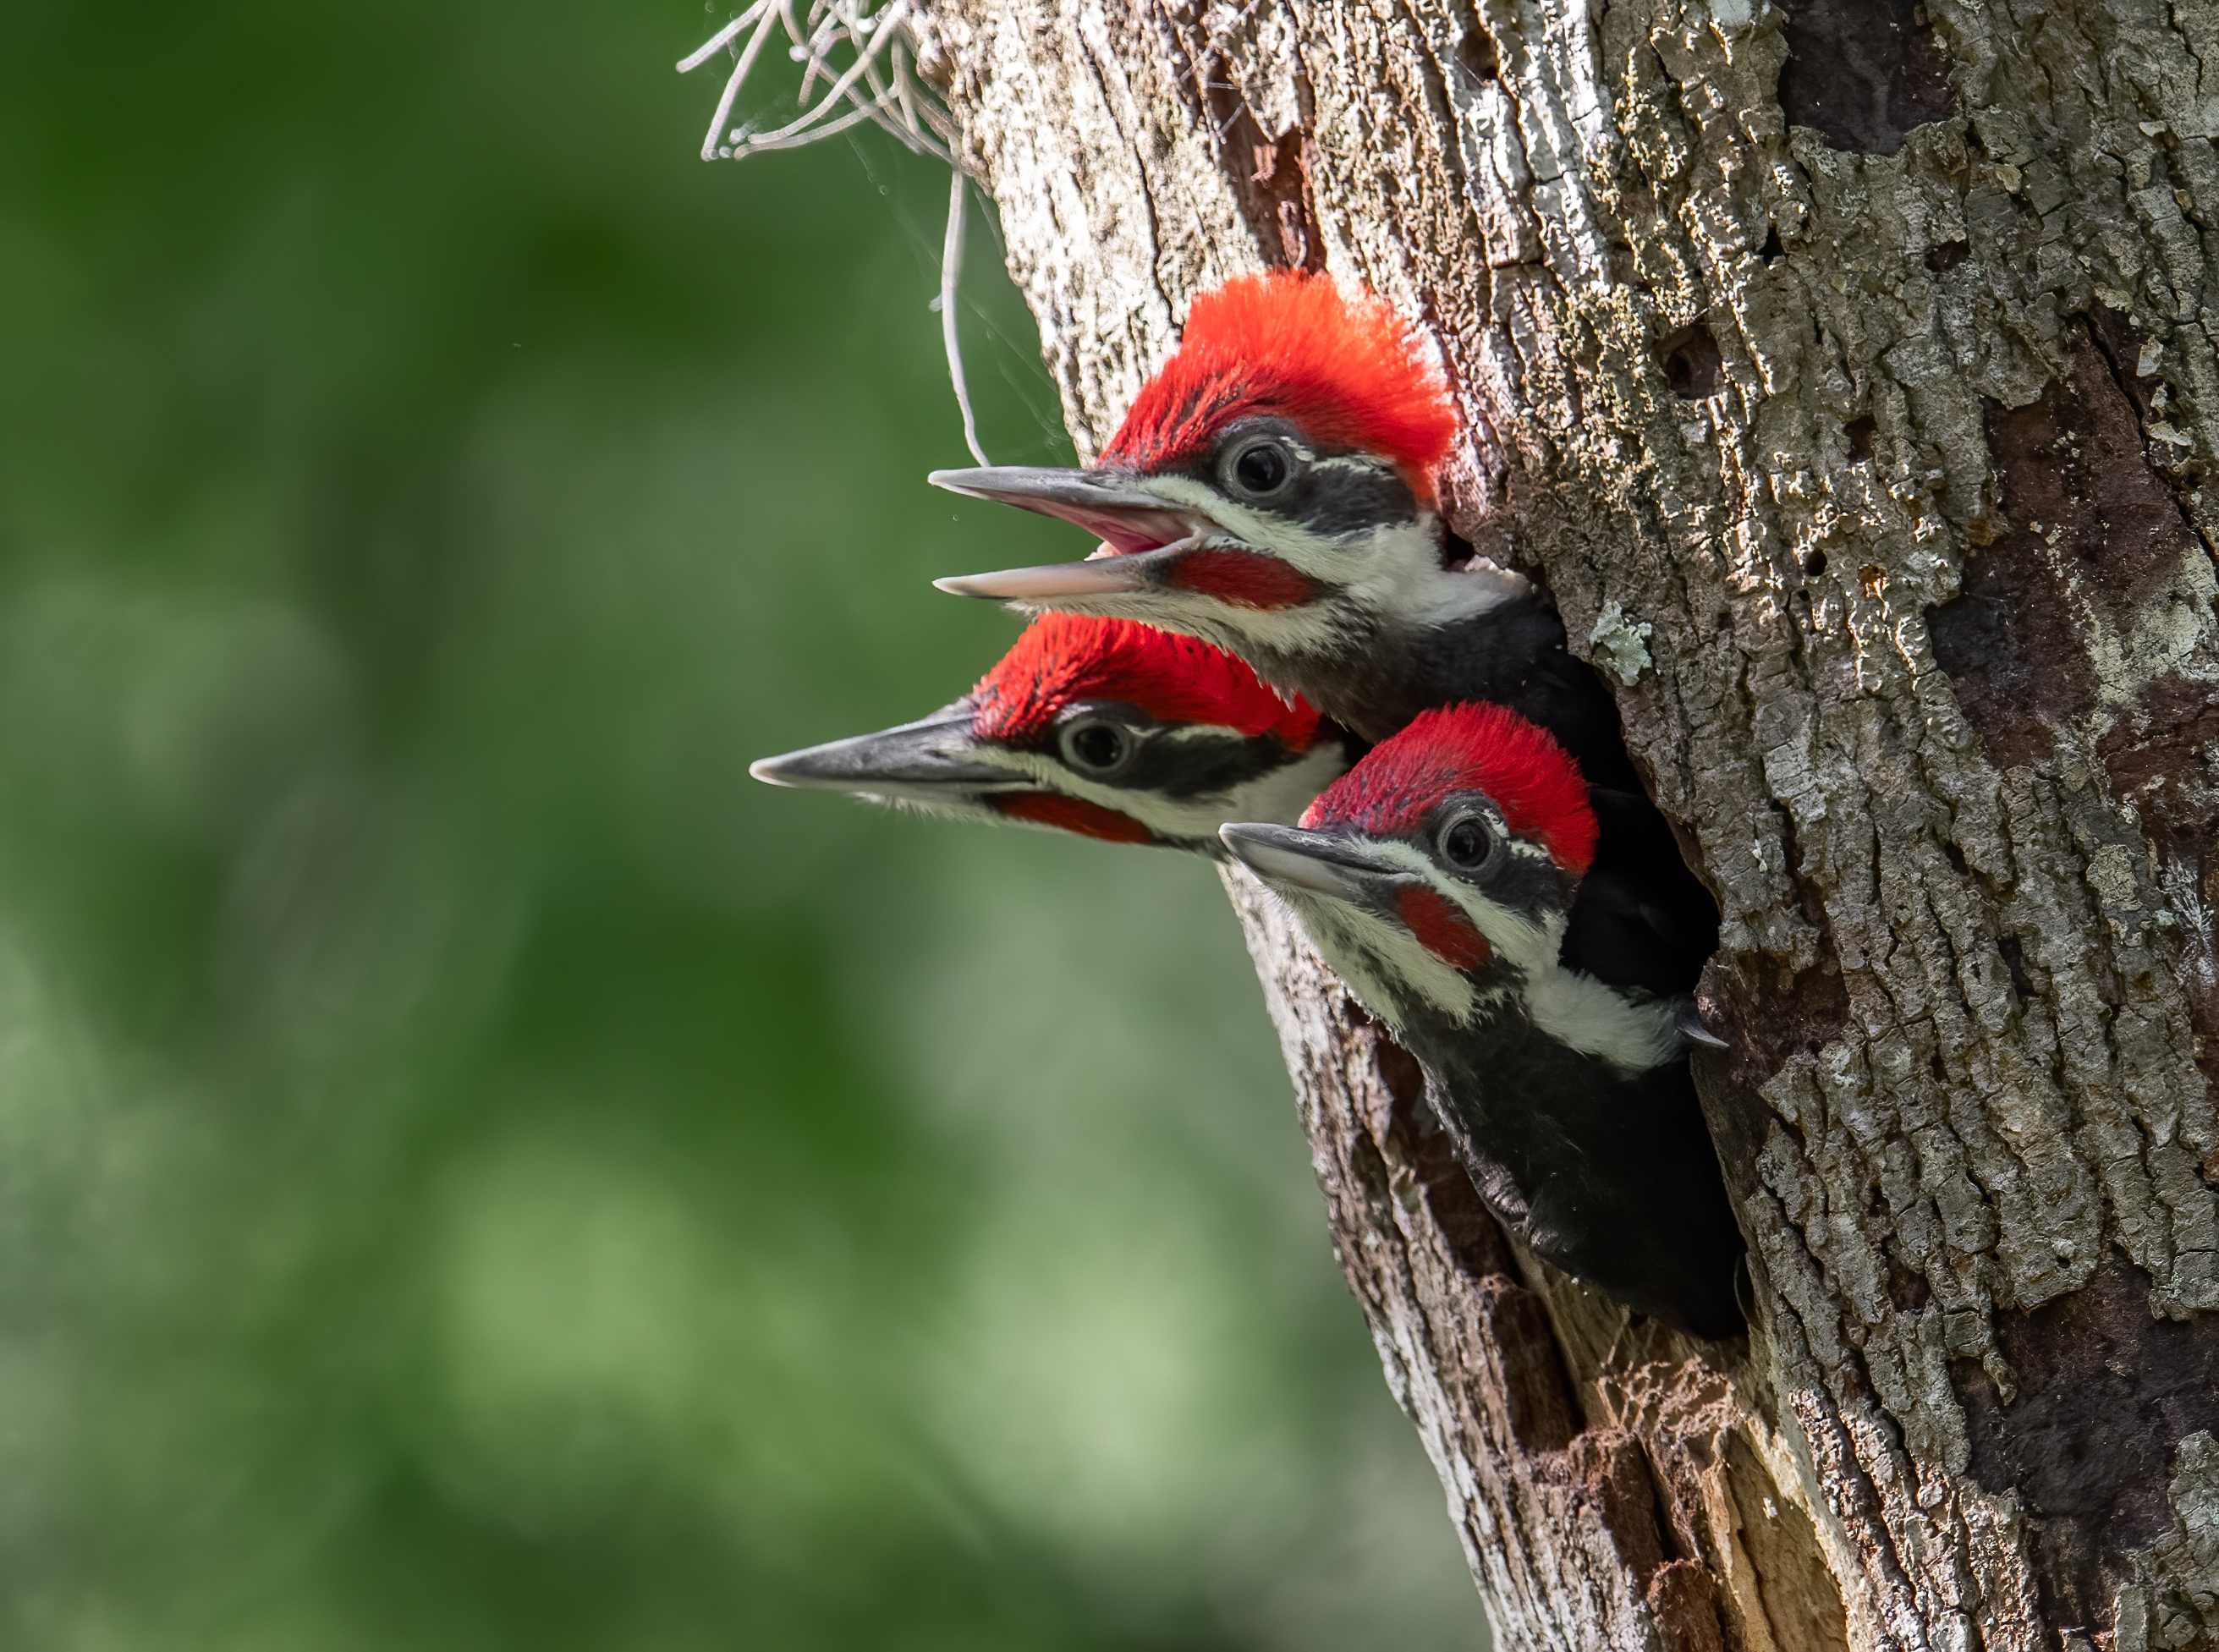 3 juvenile pileated woodpeckers peek out of their nest.